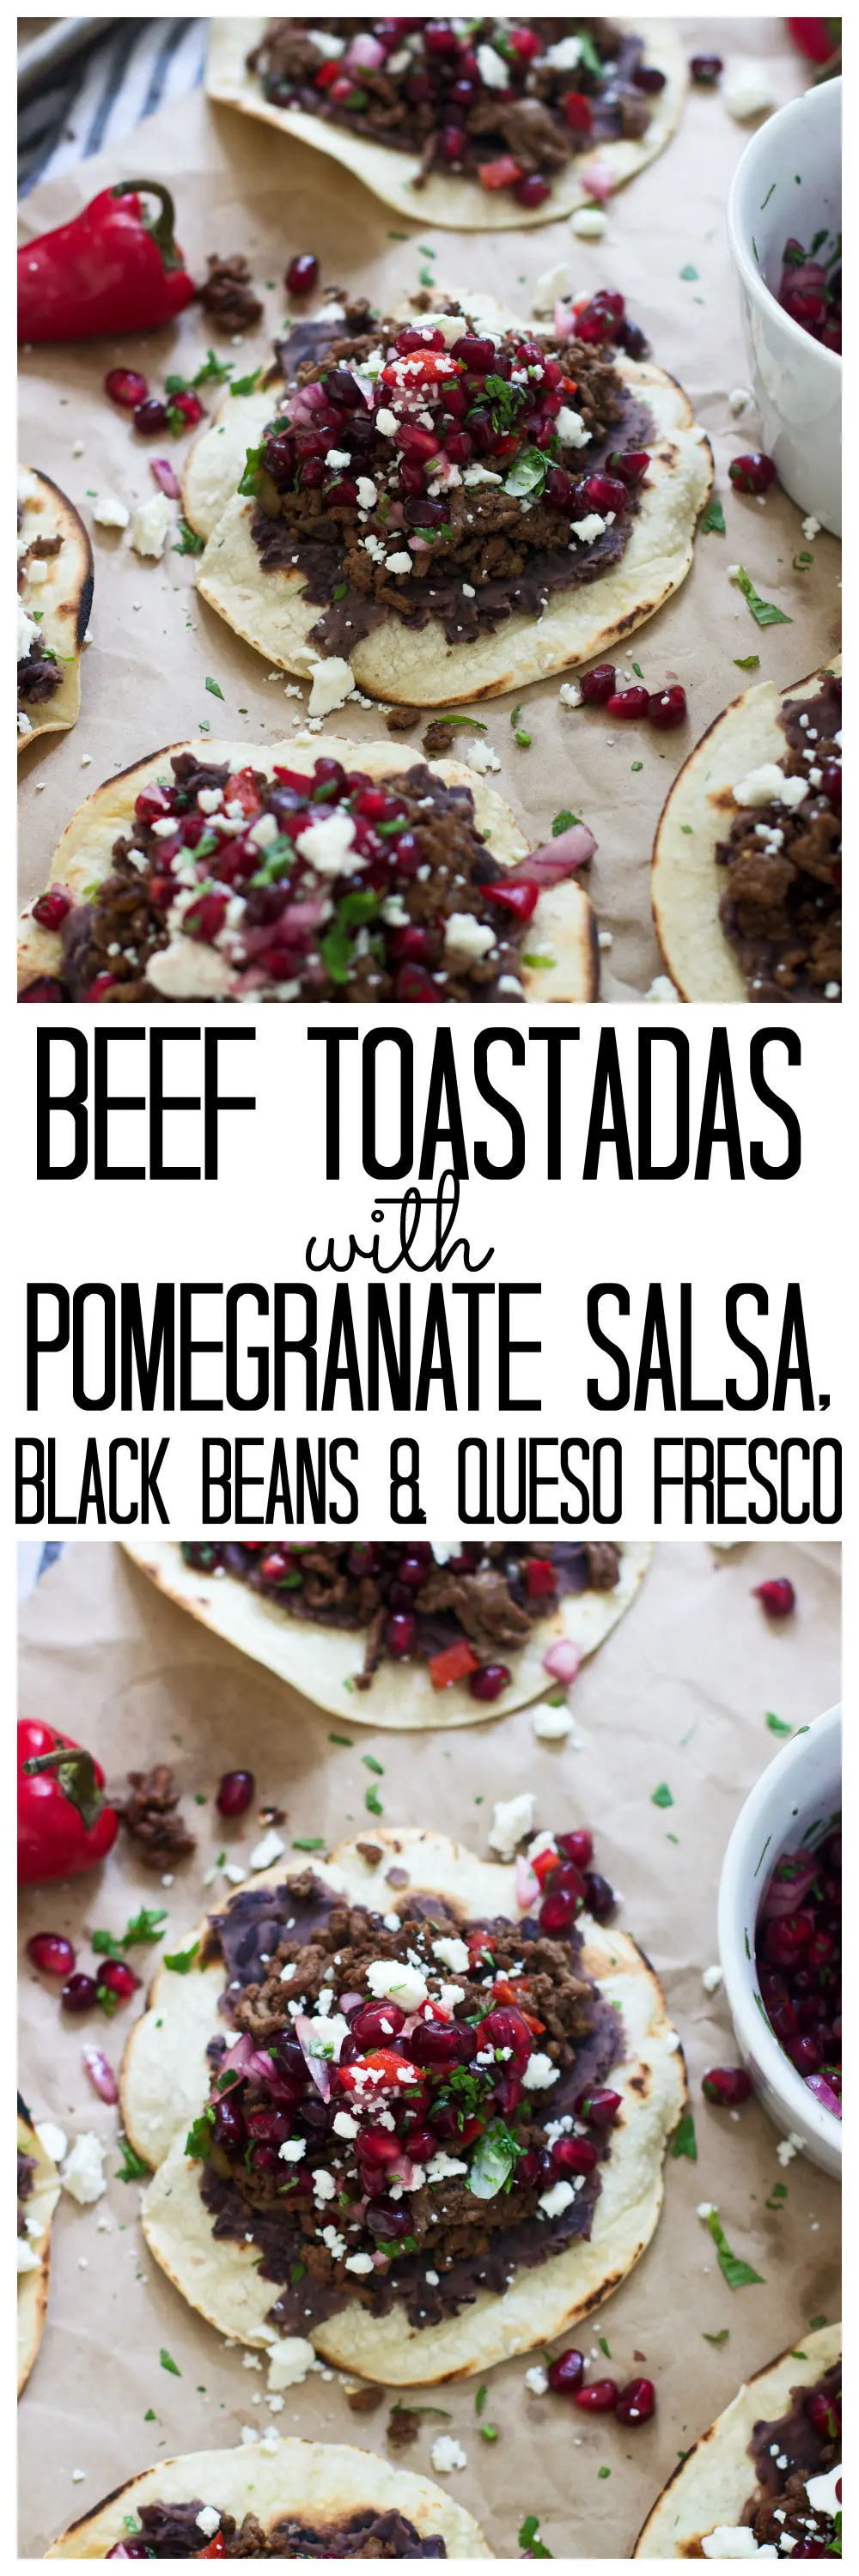 Beef Tostadas with Pomegranate Salsa, Black Beans and Queso Fresco